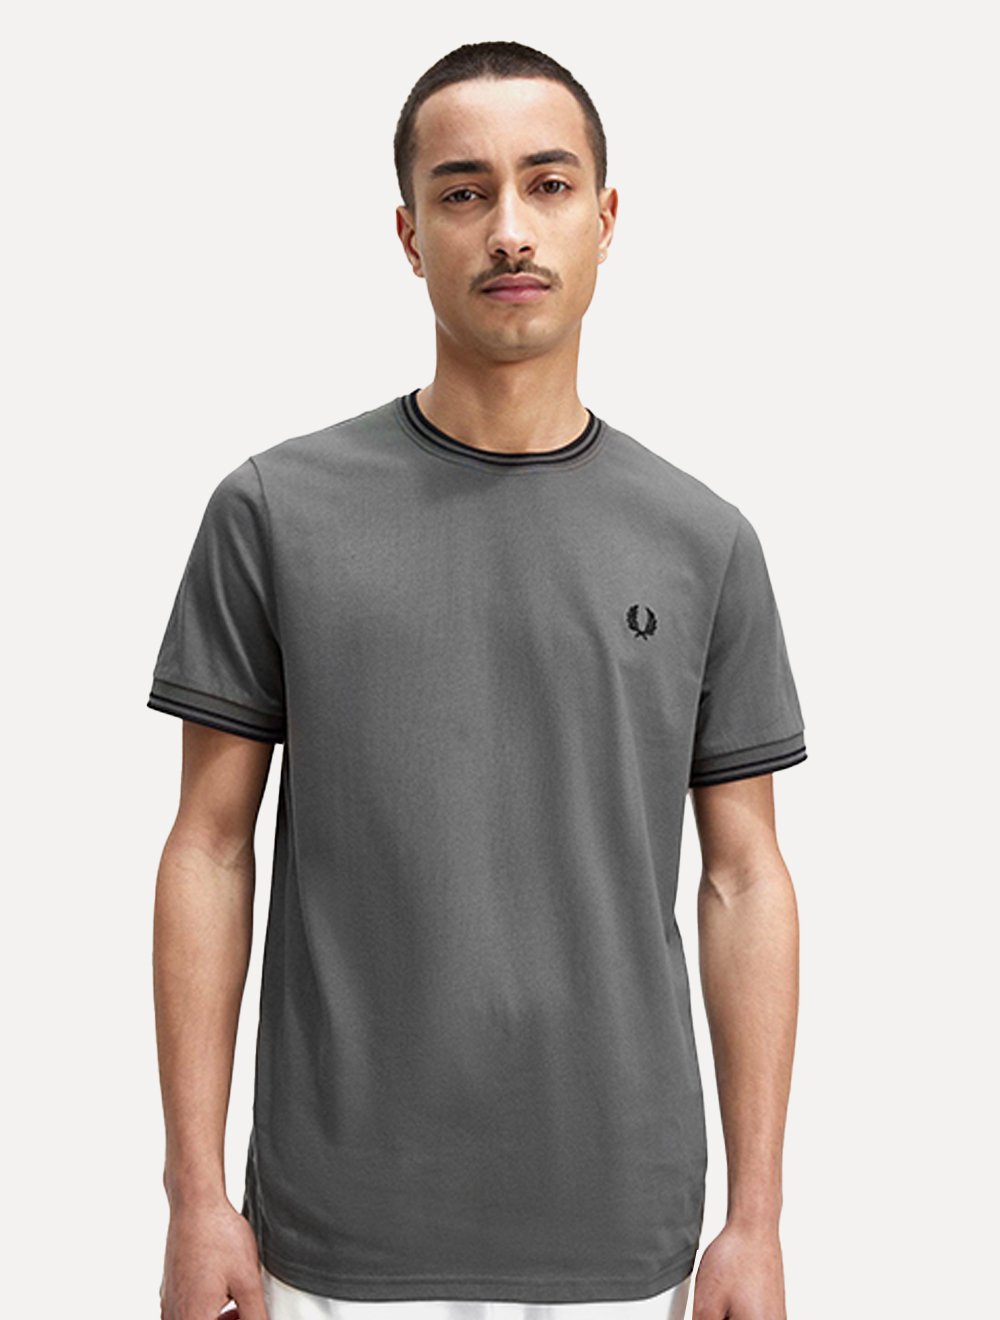 Camiseta Fred Perry Masculina Regular Twin Tipped Verde Escuro